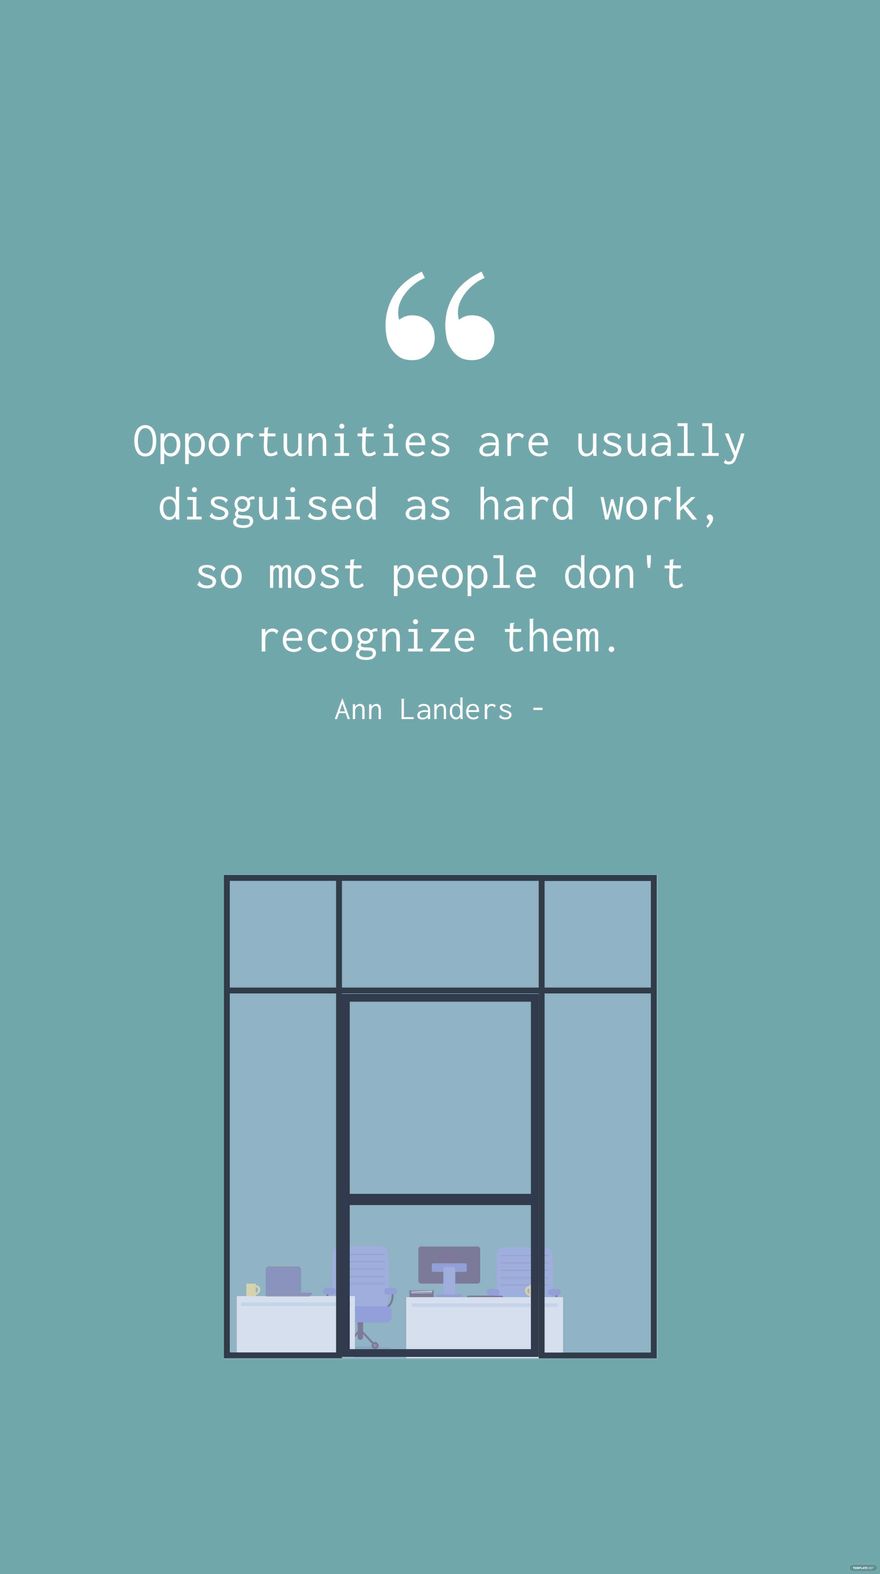 Ann Landers - Opportunities are usually disguised as hard work, so most people don't recognize them.